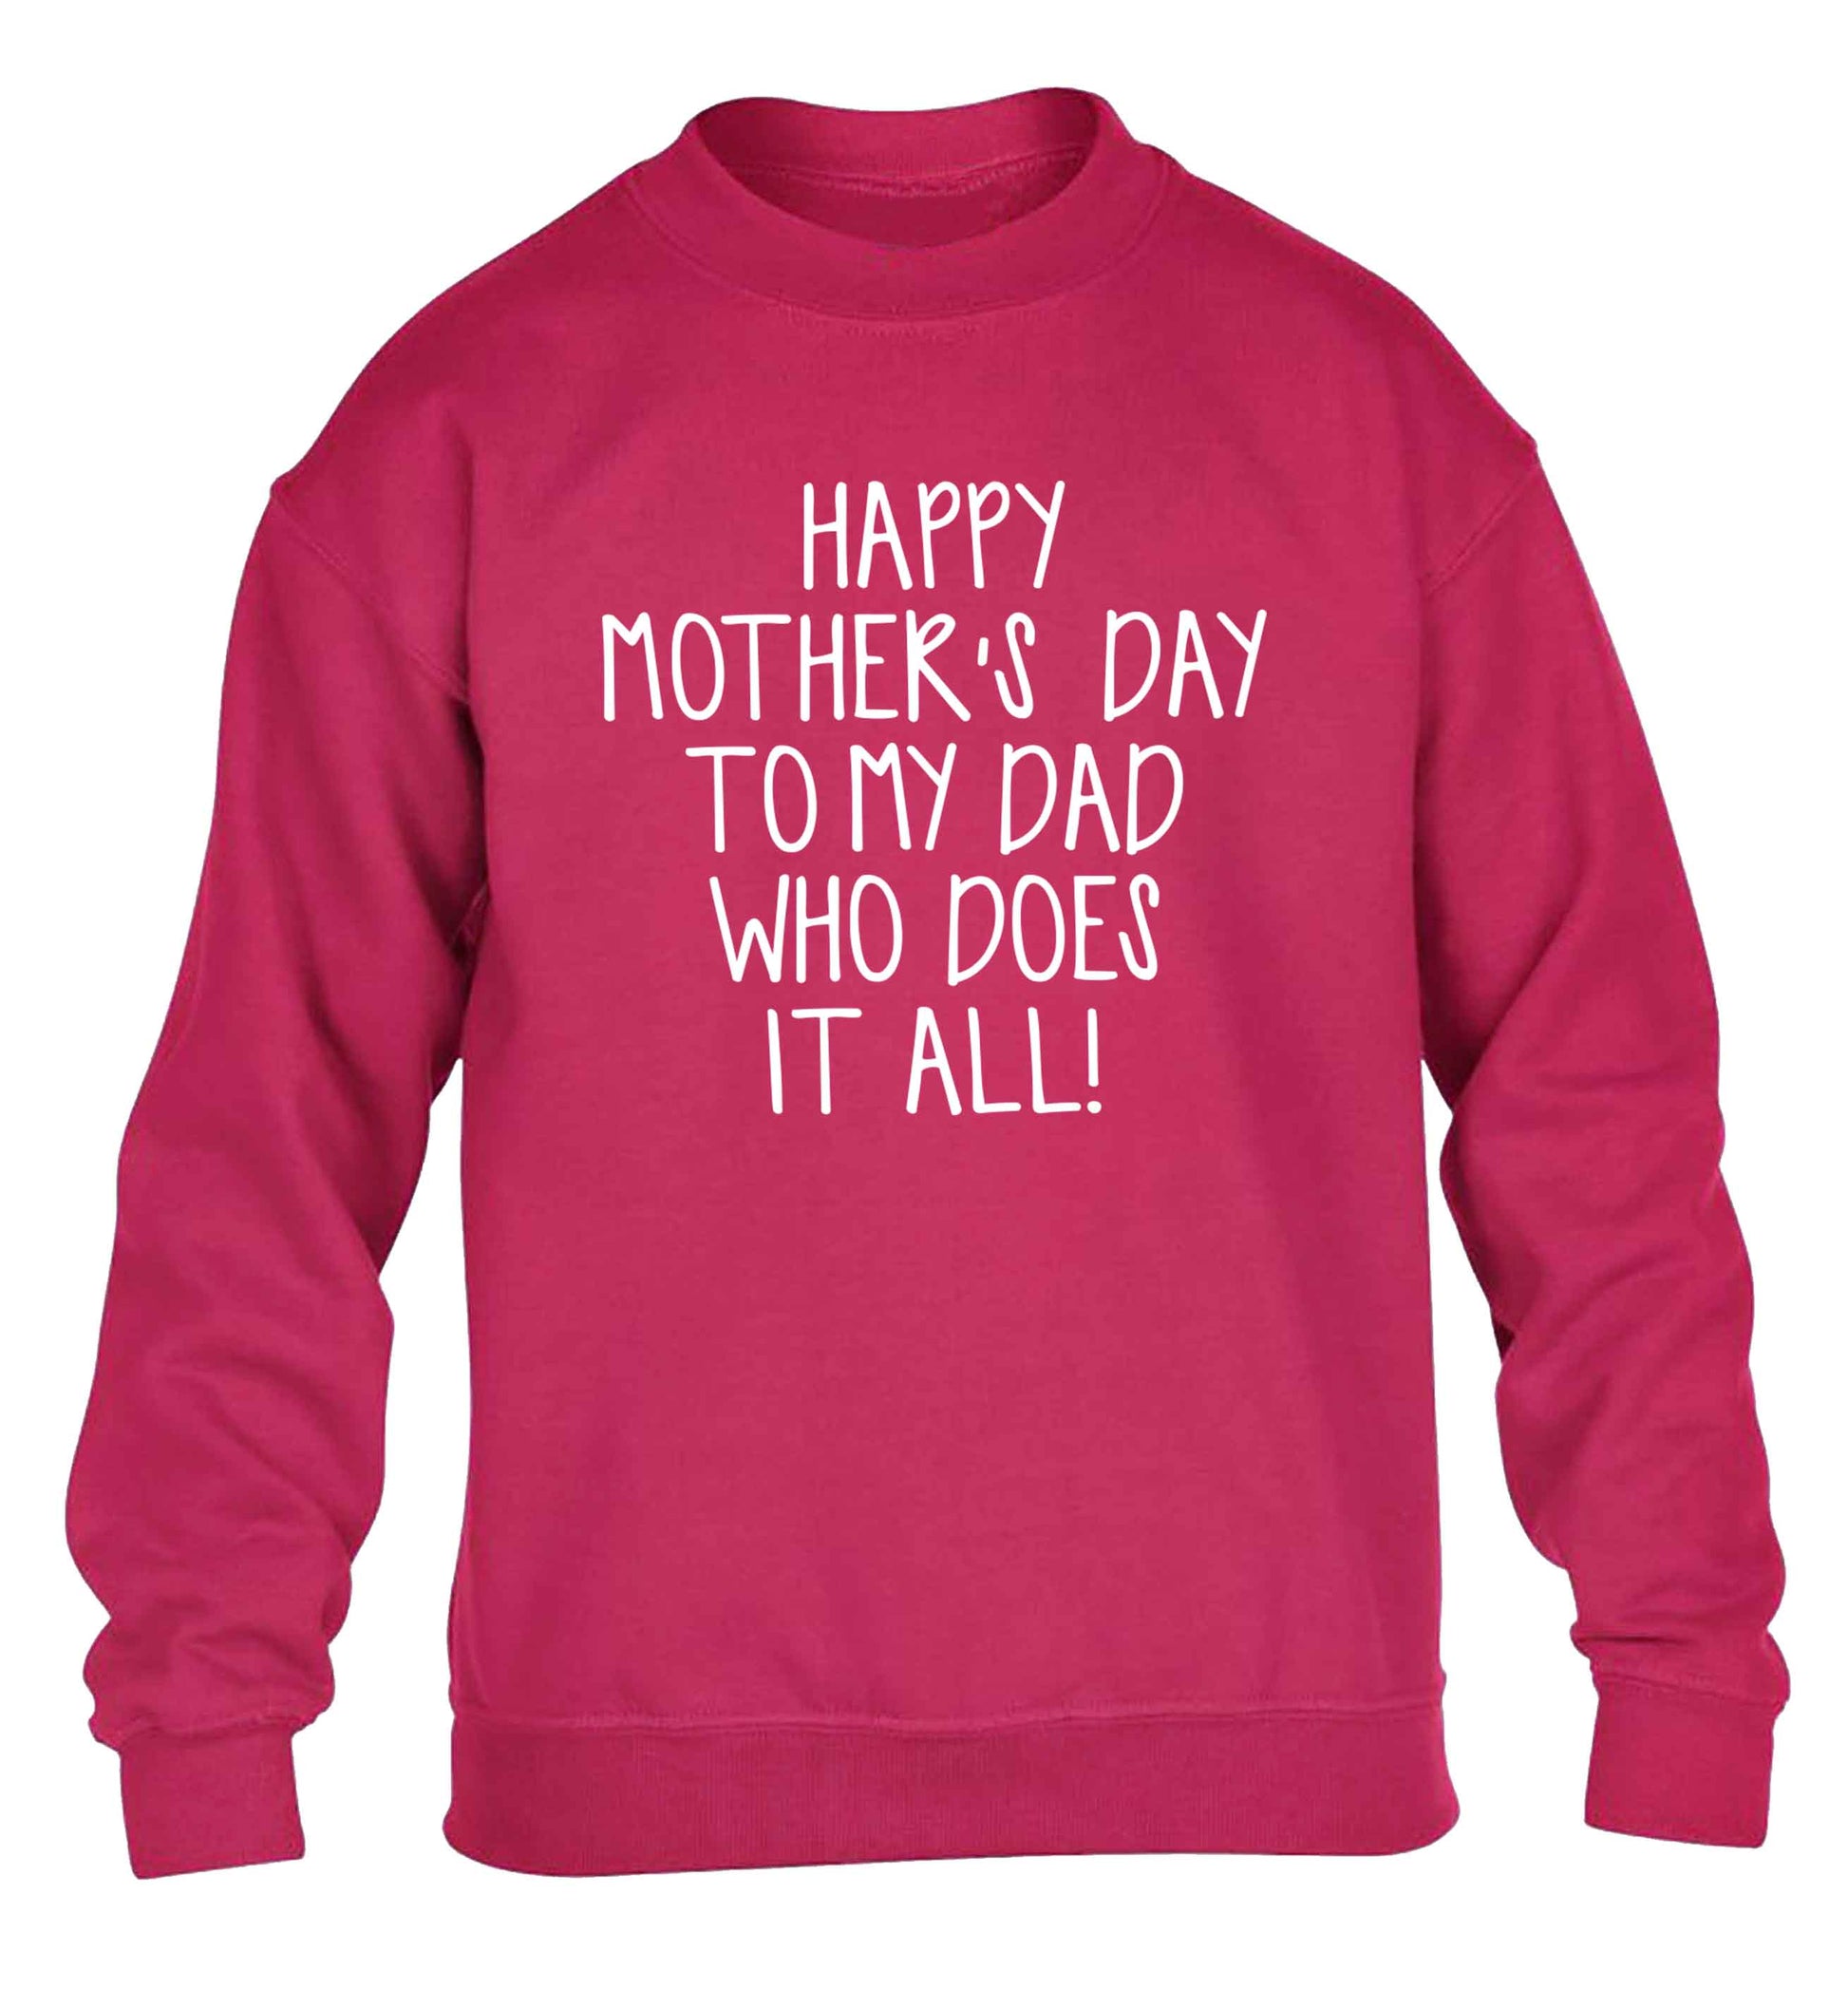 Happy mother's day to my dad who does it all! children's pink sweater 12-13 Years